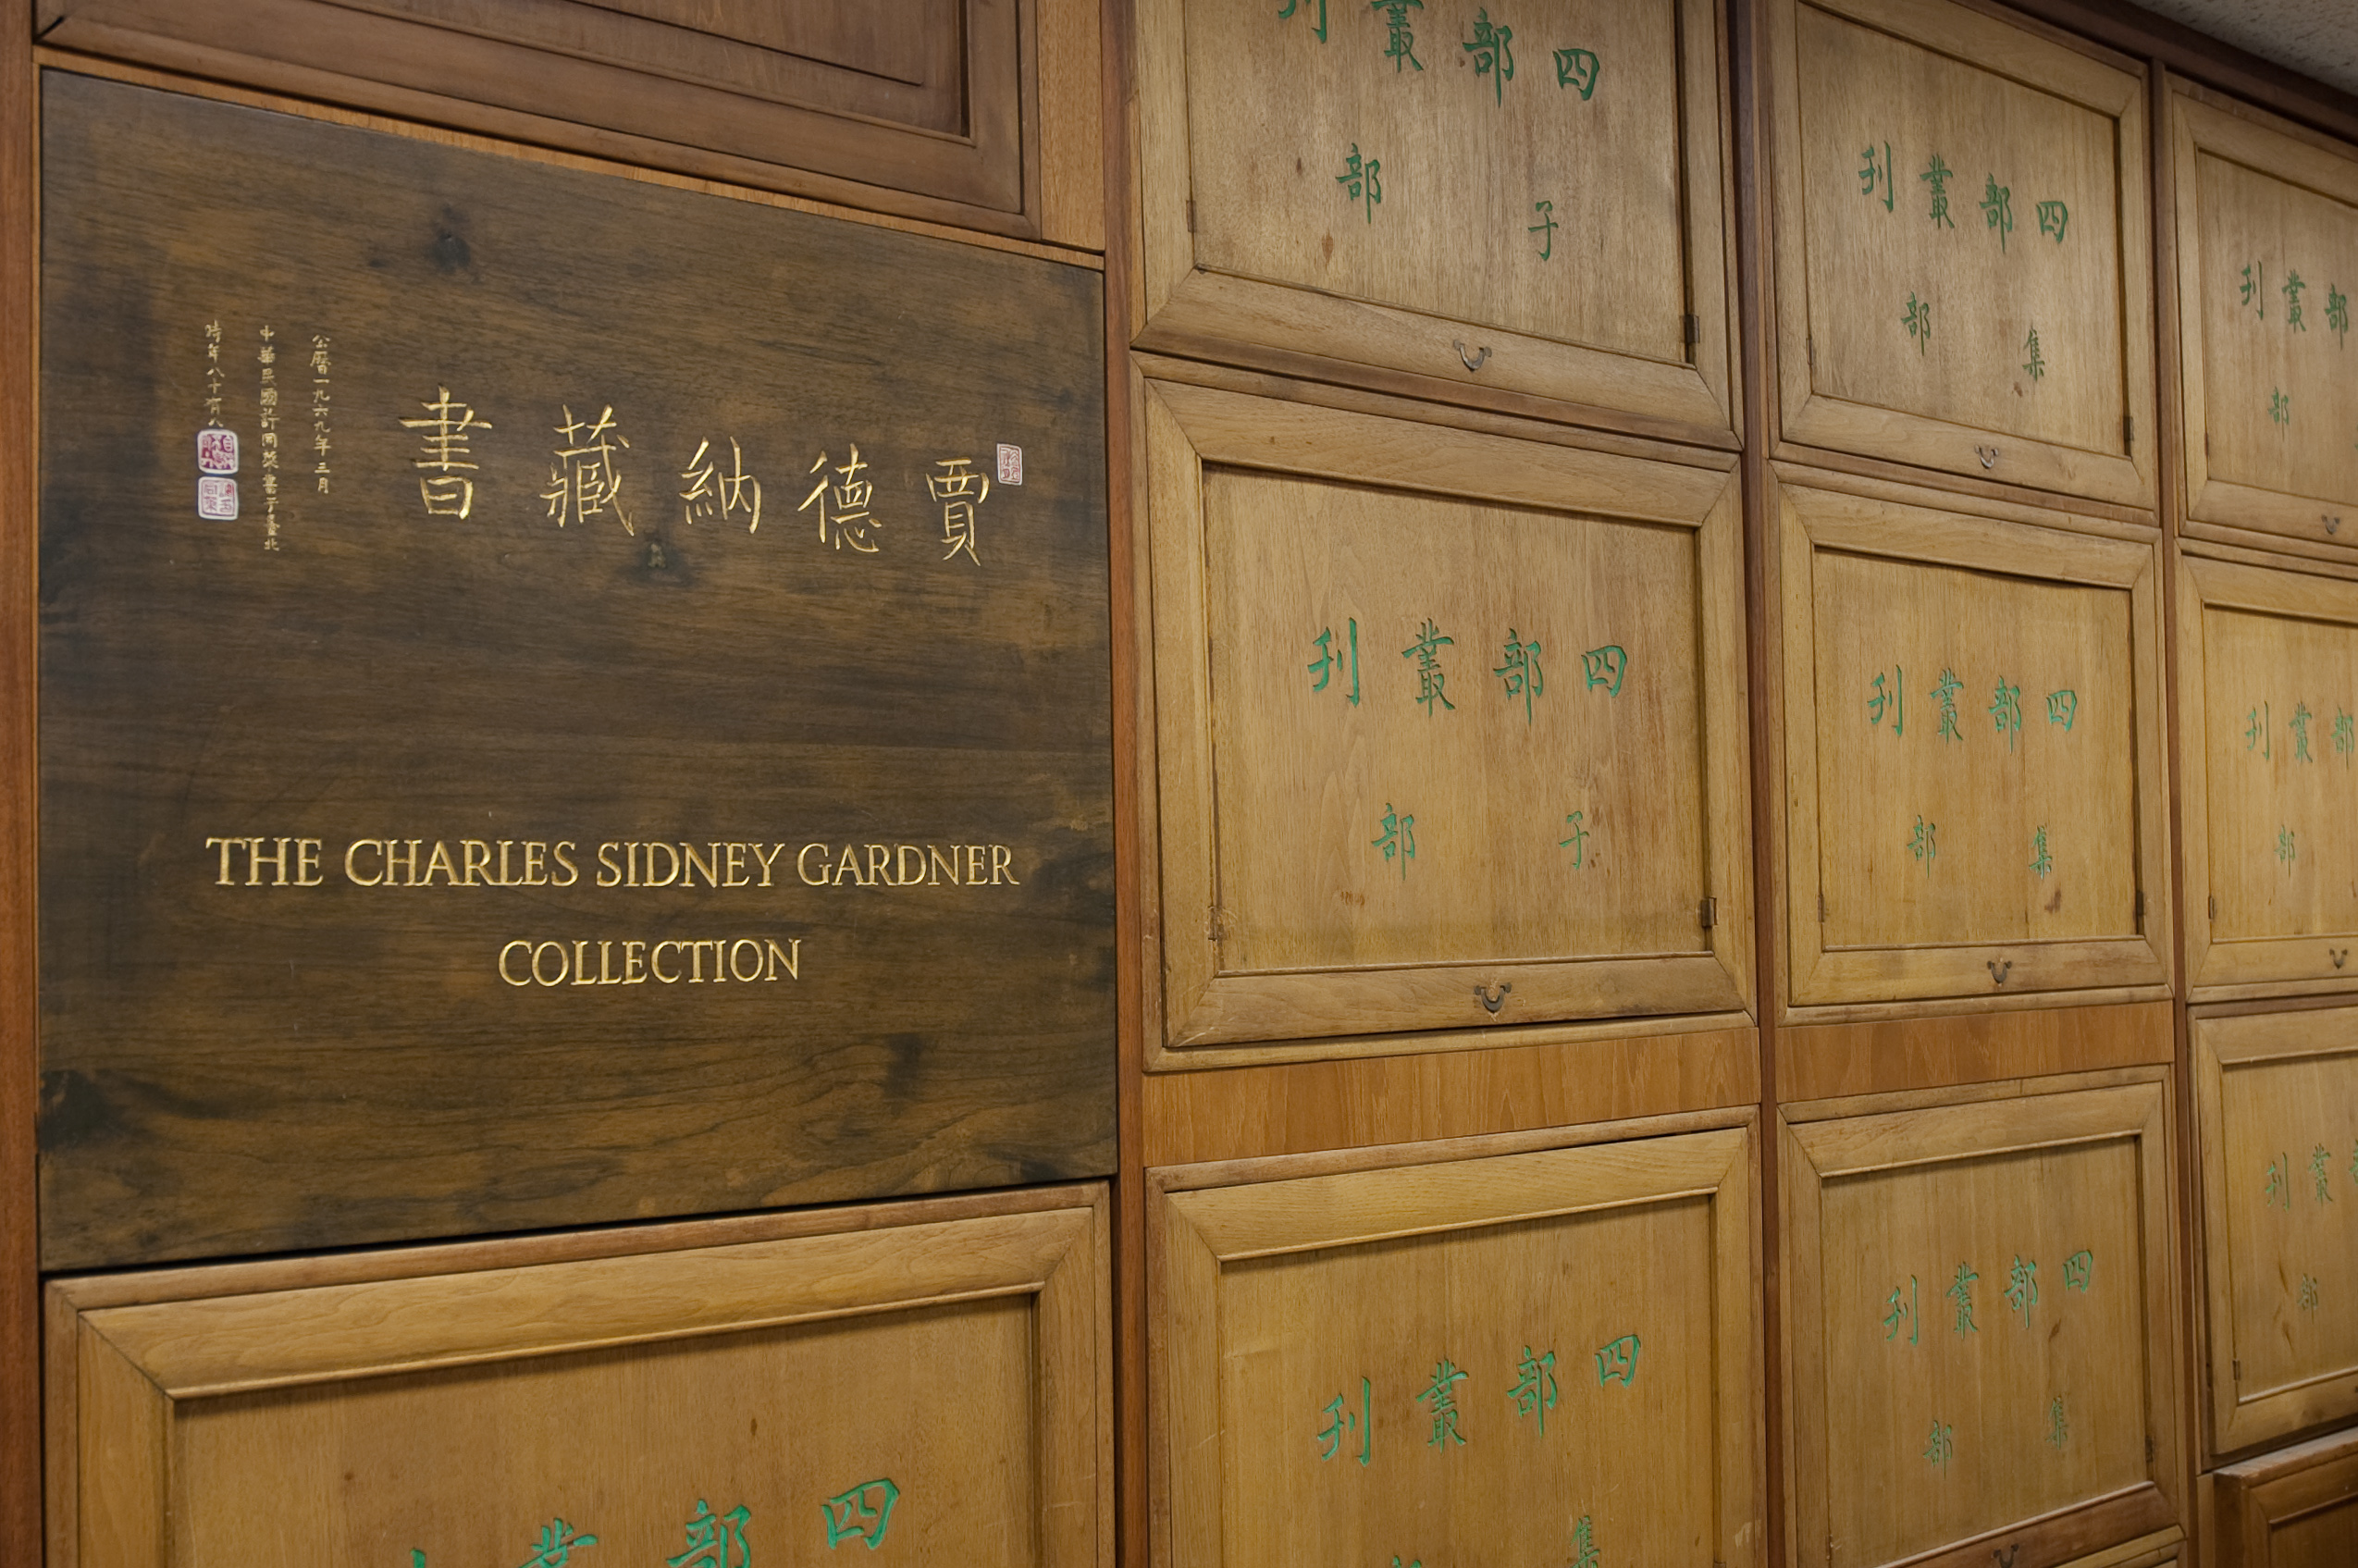 wooden panels with East Asian lettering and a sign in English reading 'The Charles Sidney Gardner Collection'